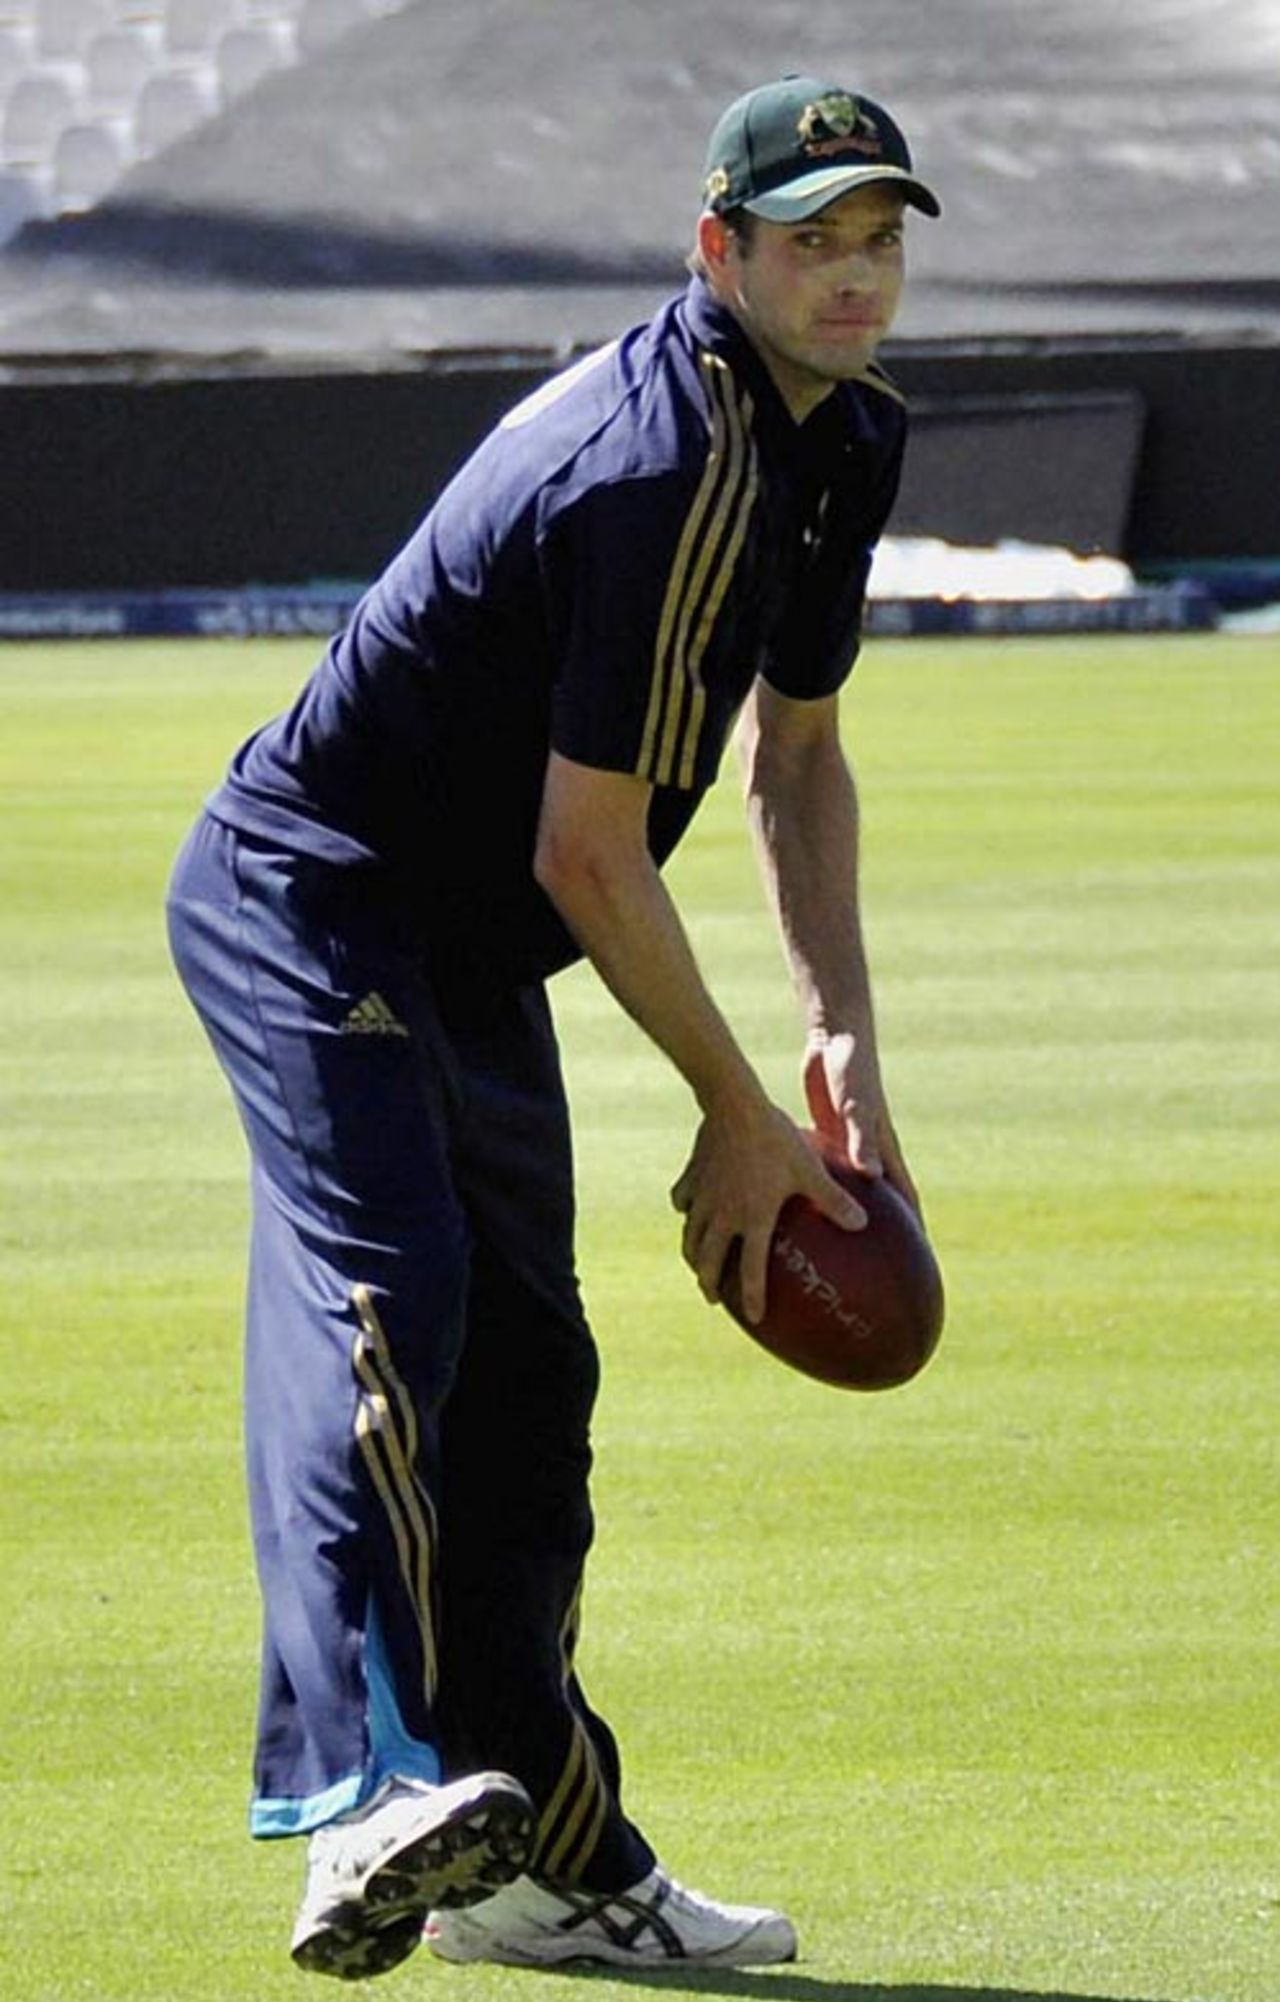 Ben Laughlin during a training session, Newlands, Cape Town, April 8, 2009